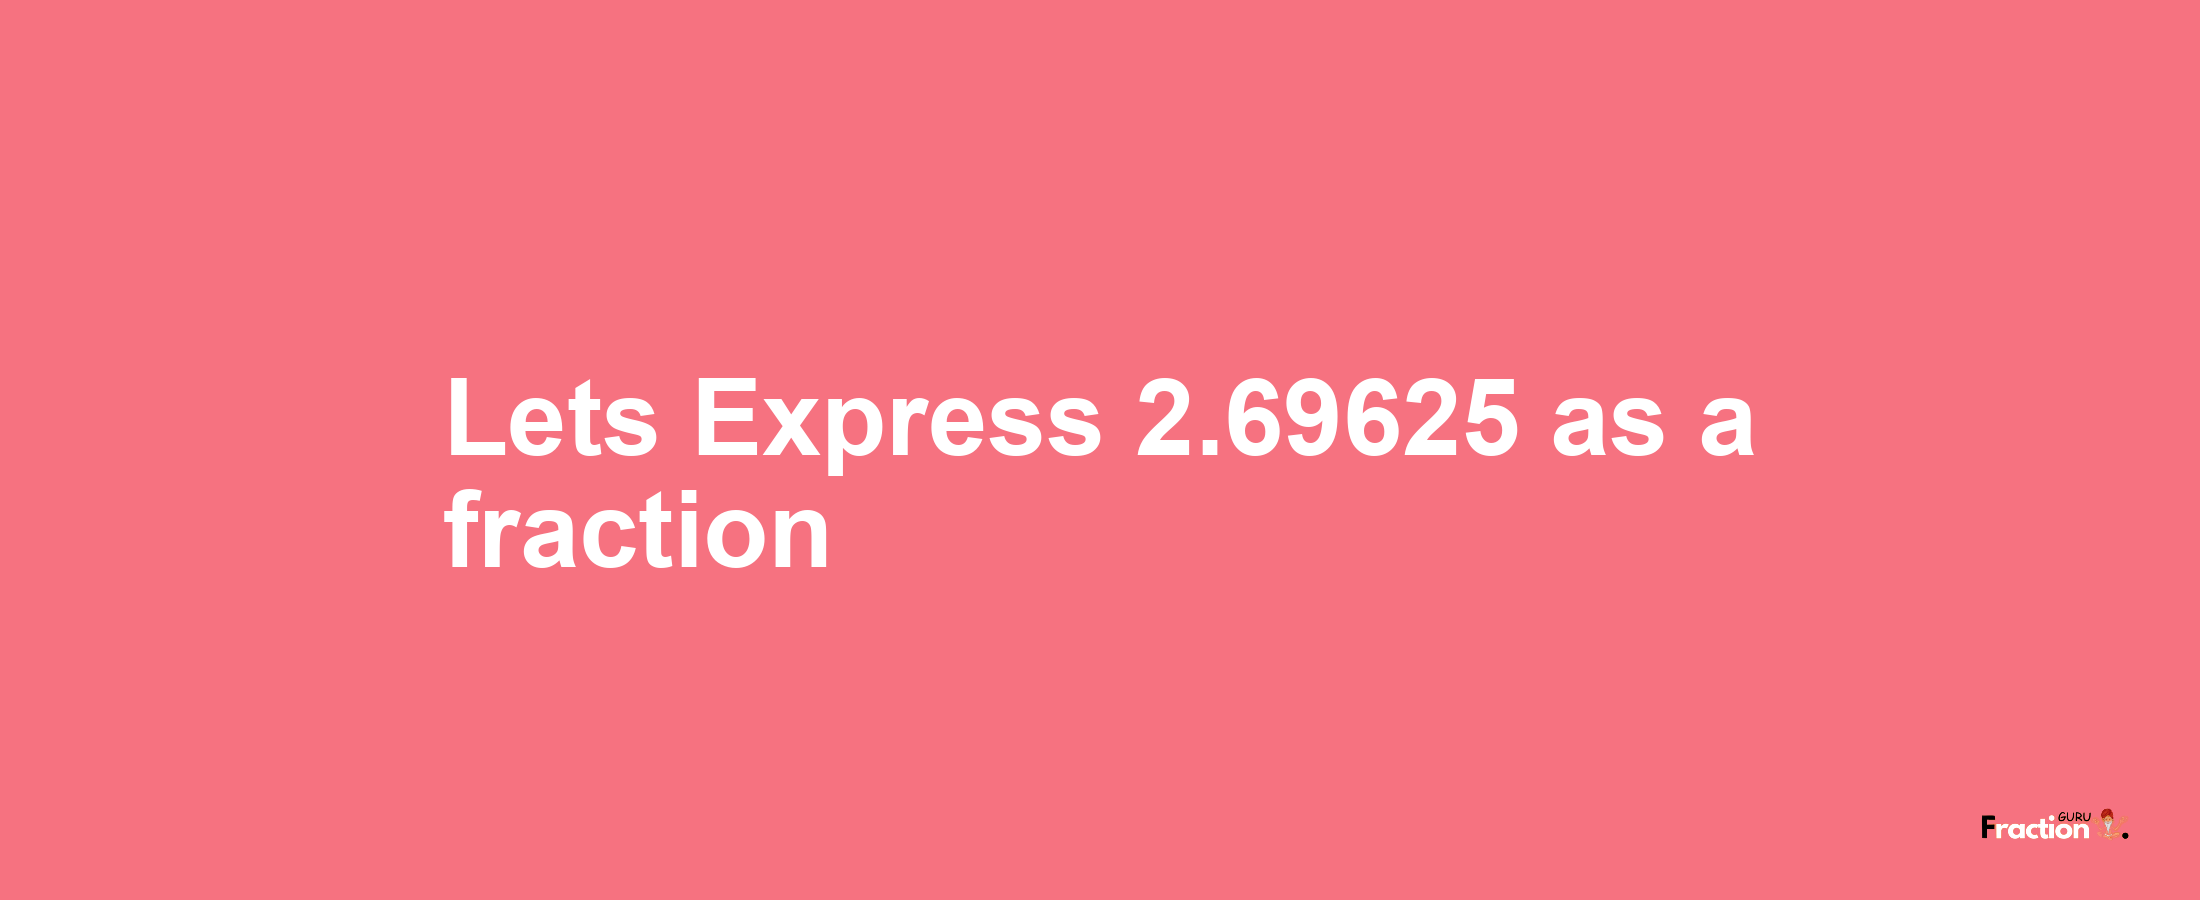 Lets Express 2.69625 as afraction